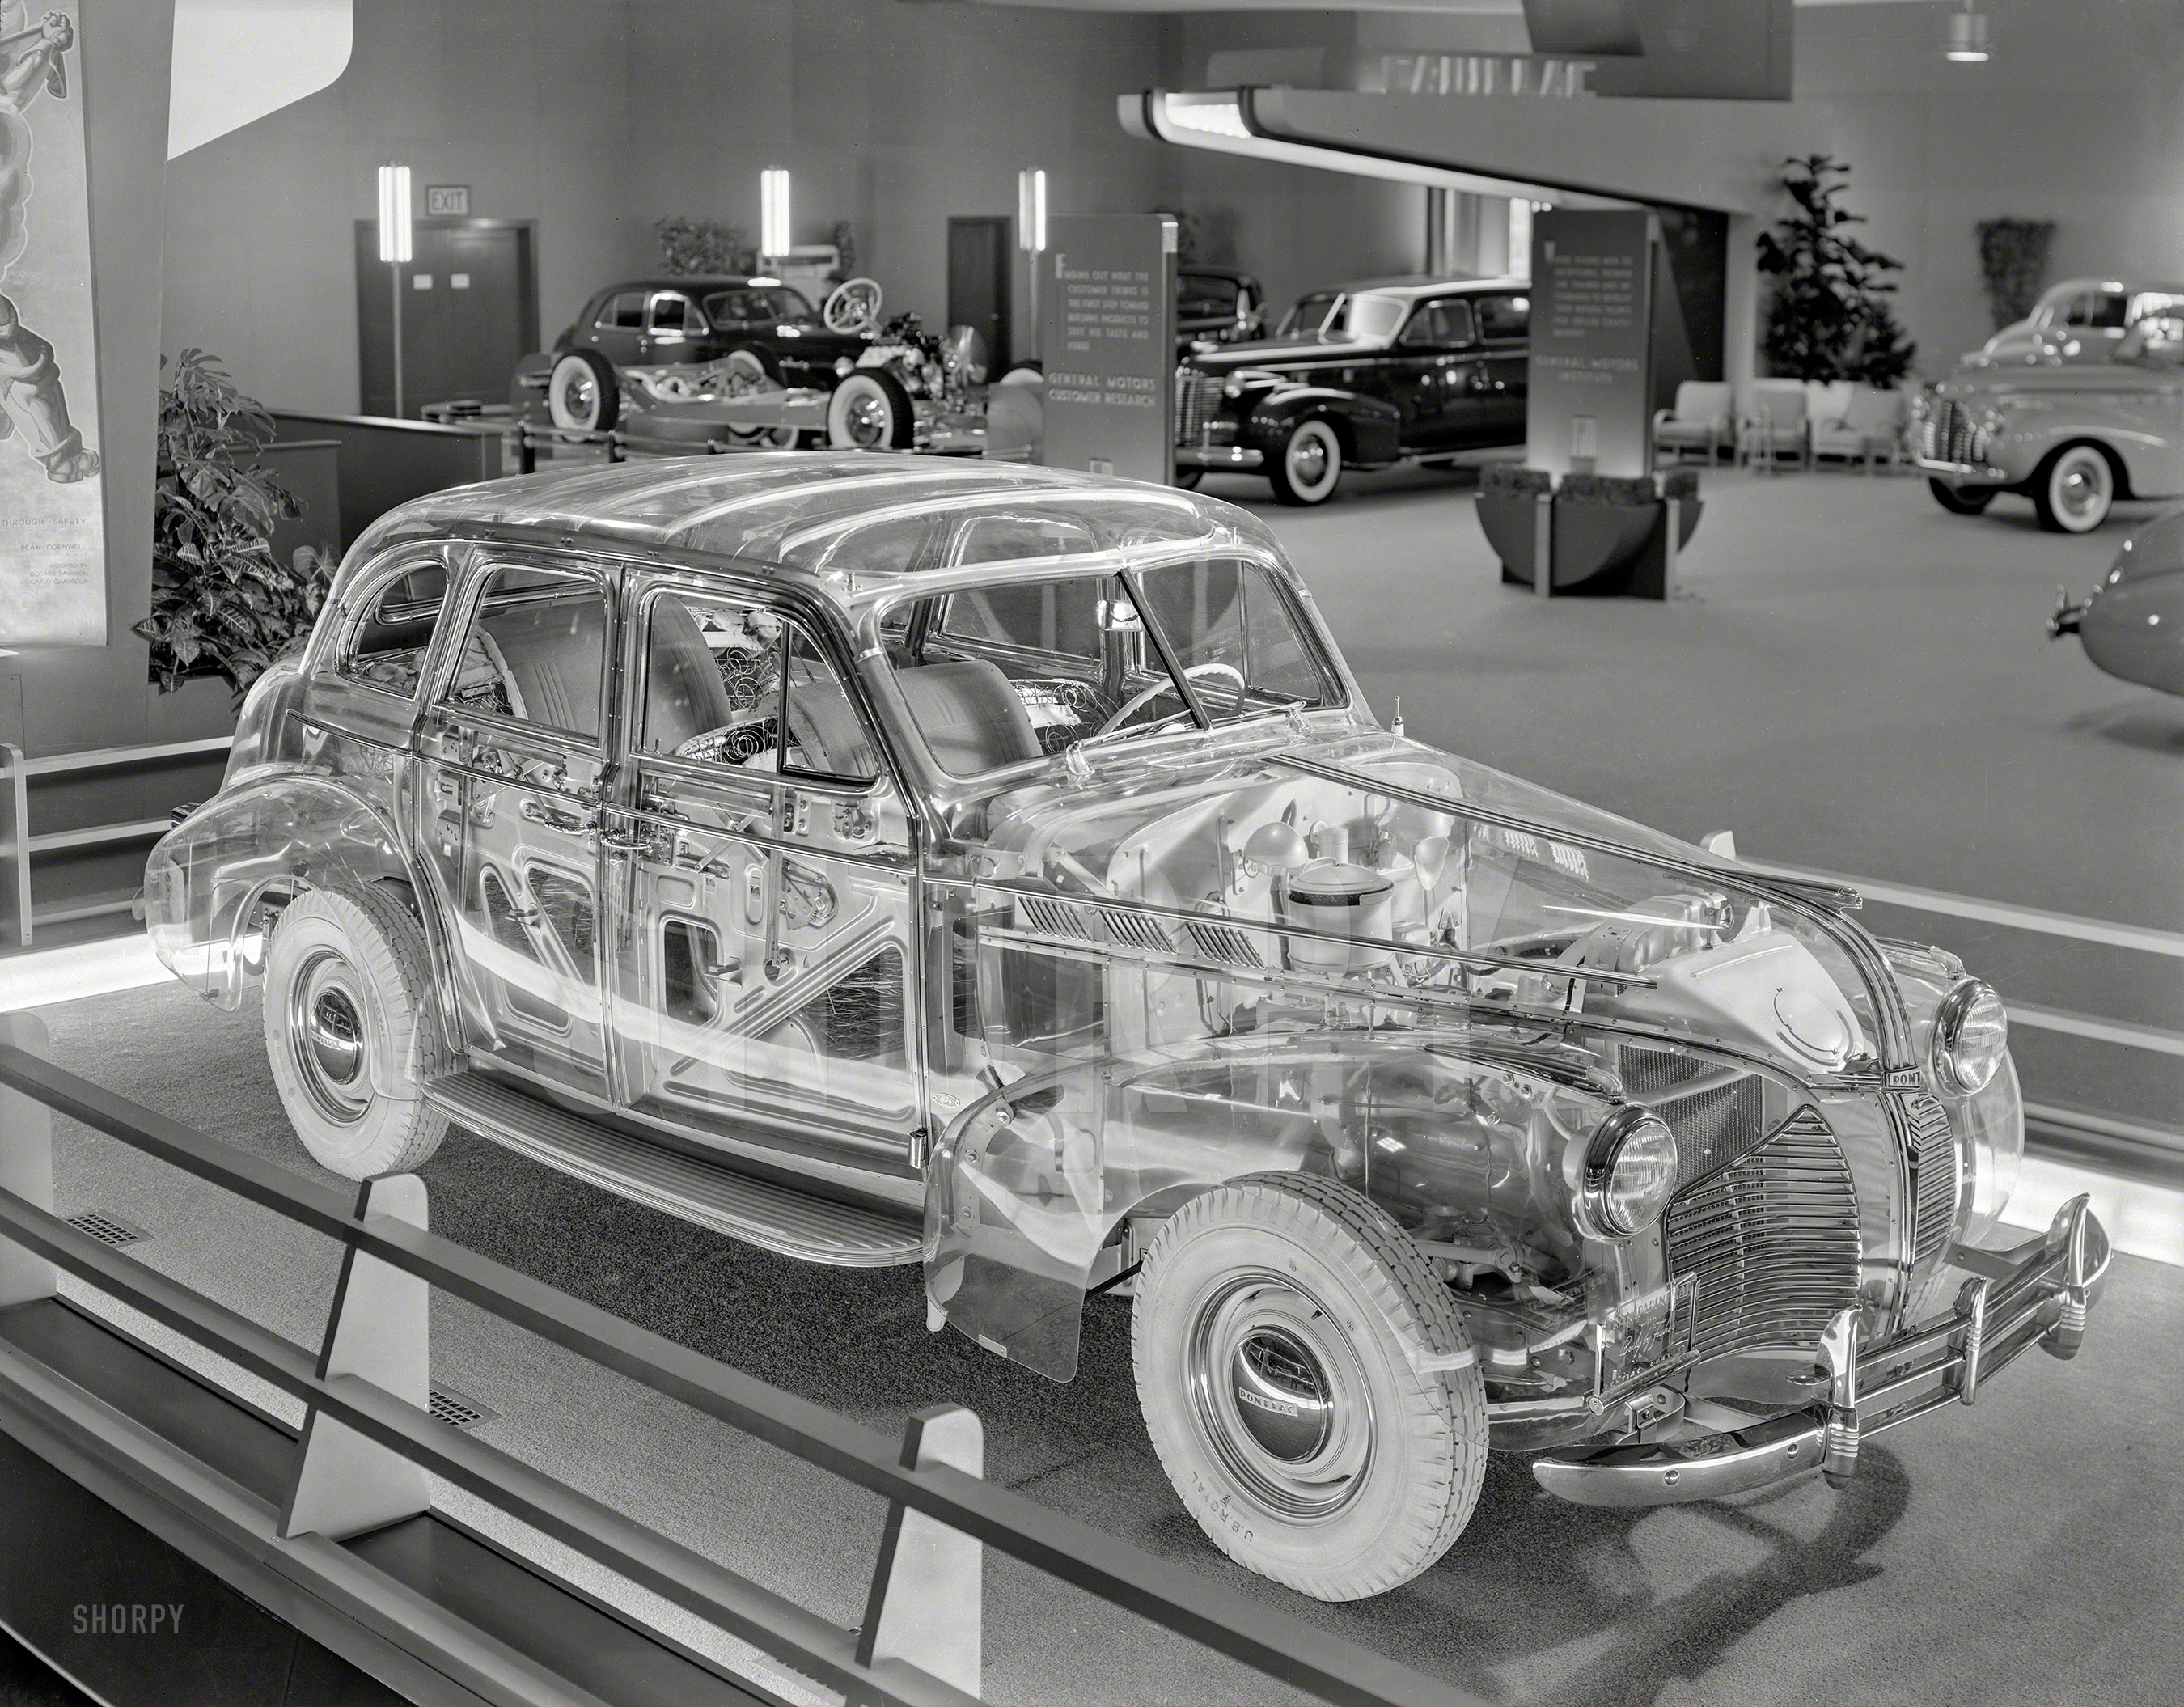 &nbsp; &nbsp; &nbsp; &nbsp; Another look at the Pontiac "Ghost Car" seen here.
June 11, 1940. "General Motors exhibit at Golden Gate International Exposition, San Francisco. Transparent Car with Pontiac Chassis and Body by Fisher." 8x10 Agfa negative, originally from the Wyland Stanley collection. View full size.